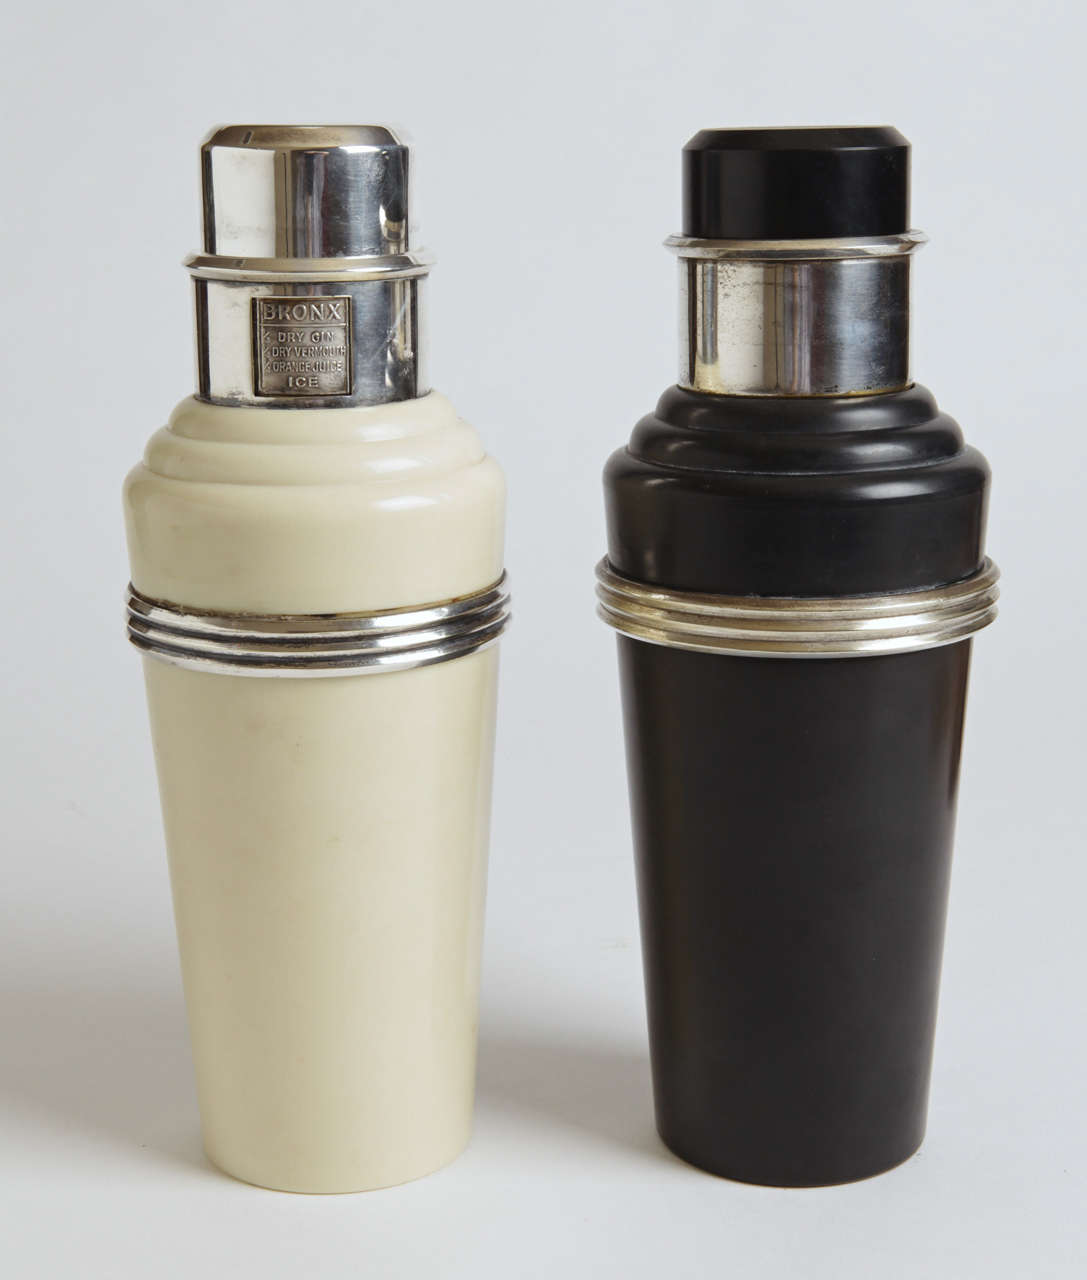 Classic pair 1930's English shakers.
THIRD VERSION AVAILABLE in mixed Black & White (not pictured).

Two Pictured Versions:

(1)  Original white phenolic body, with silver plate trim ring, cap, spout, strainer and revolving neck recipe dial. 